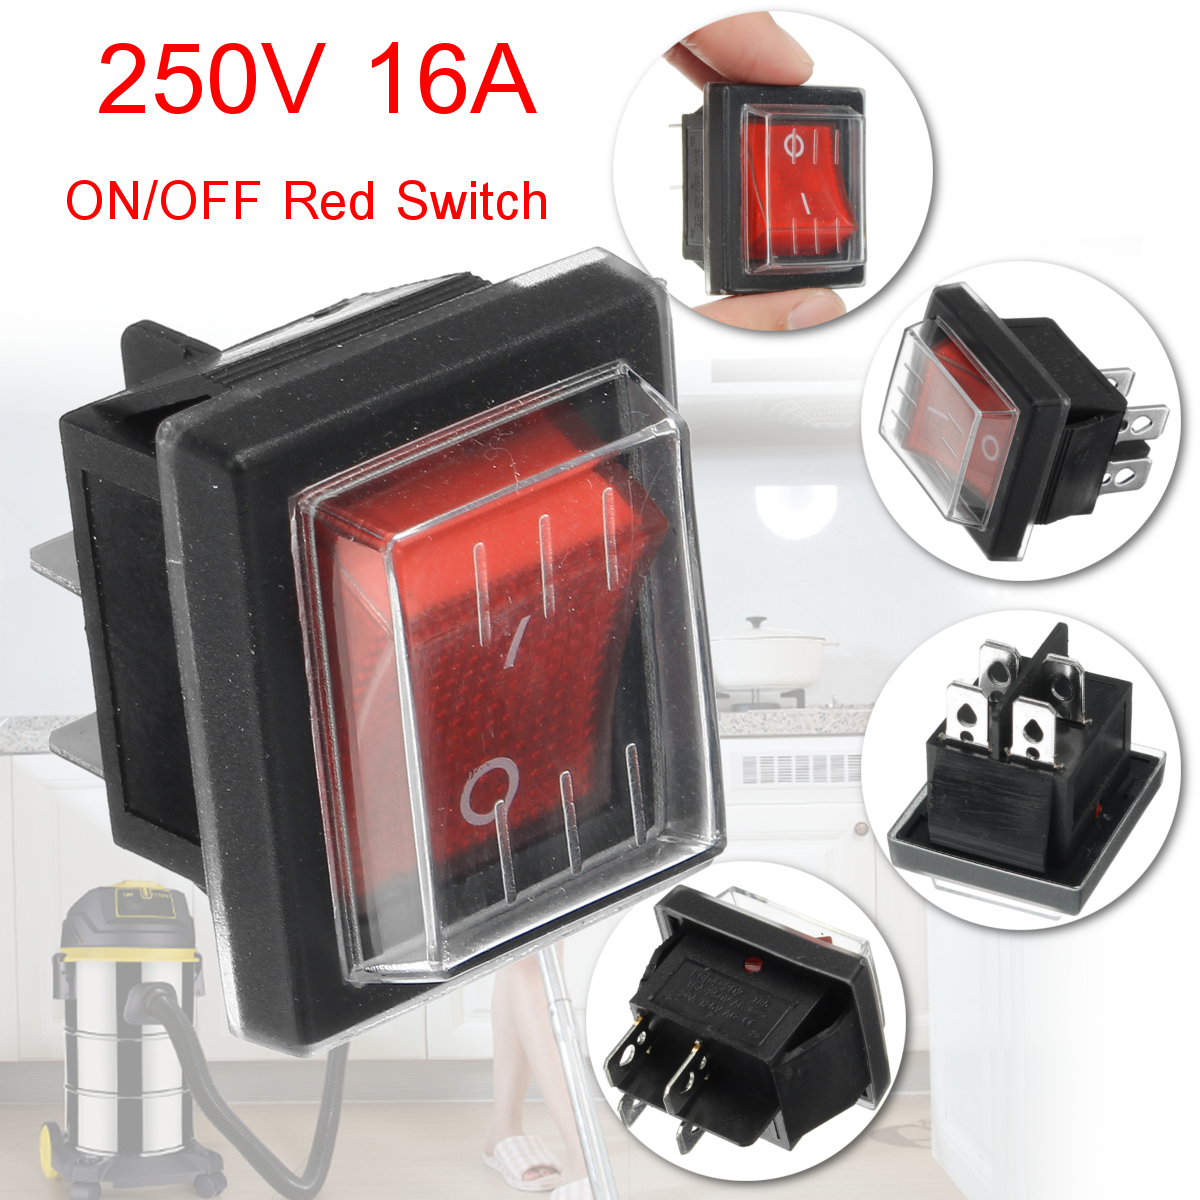 220V16A-20A-125V-ONOFF-Red-Switch-Spare-Waterproof-Switch-For-Industrial-Vacuum-Suction-Machines-1239637-2